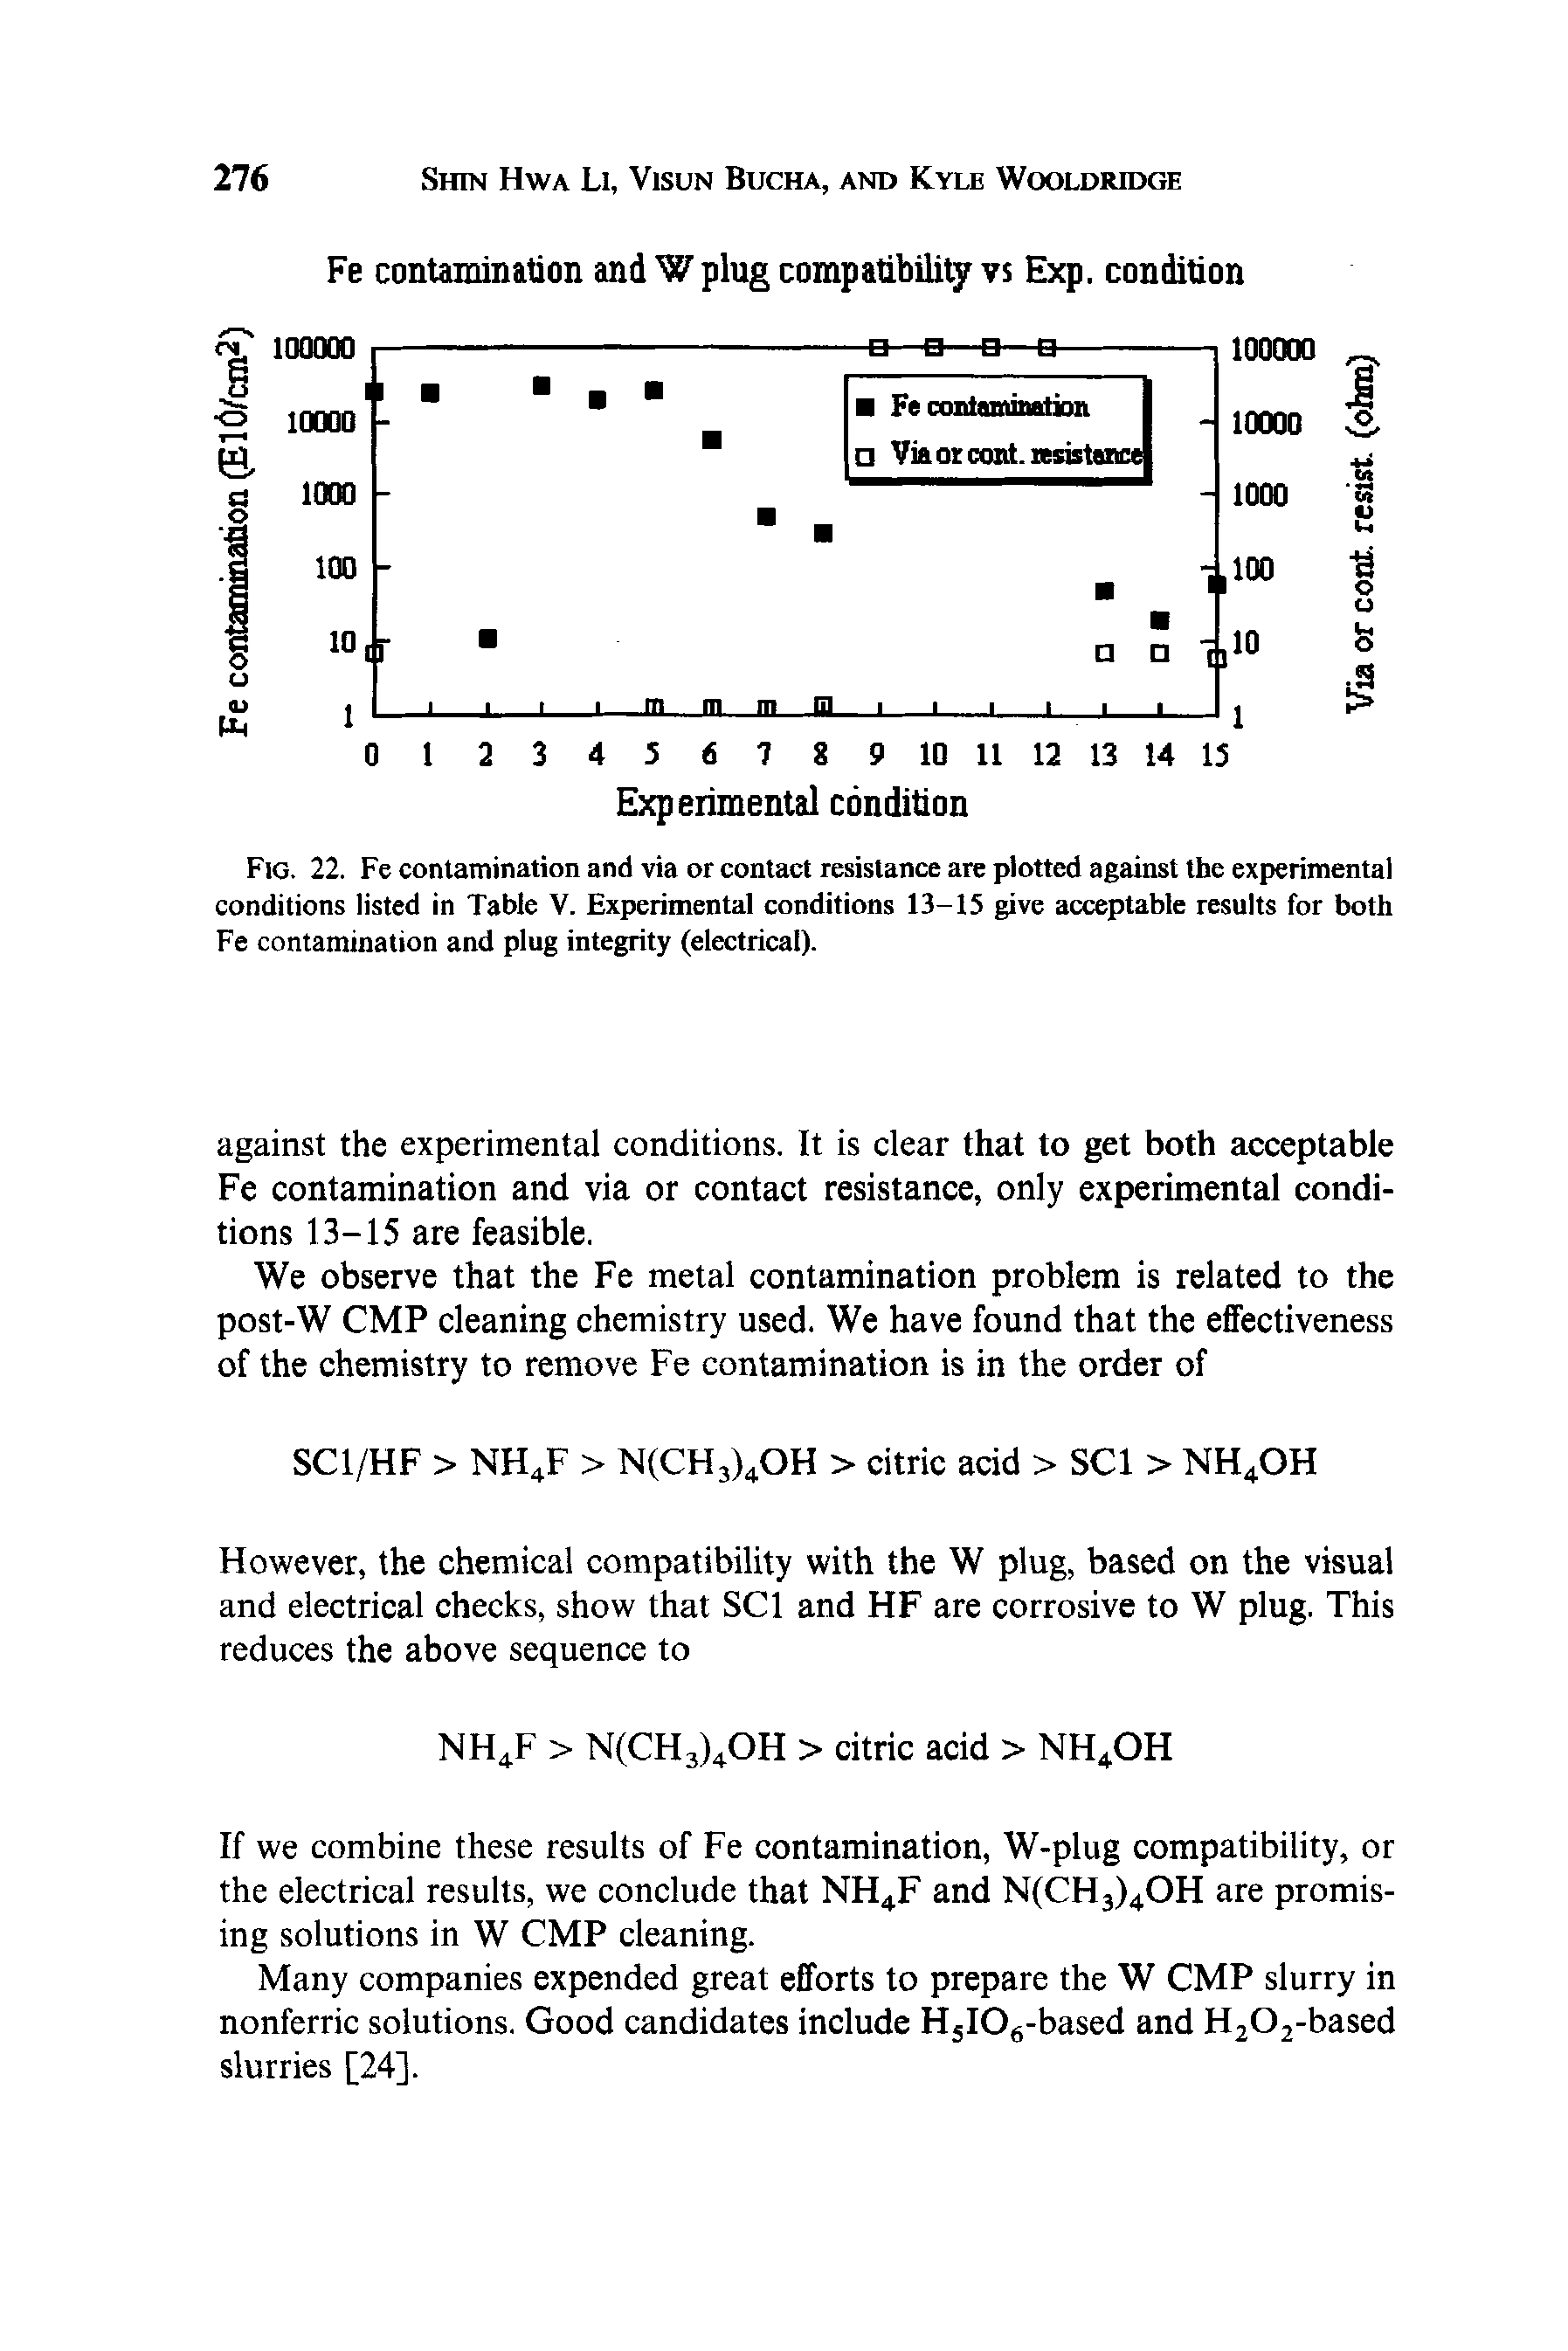 Fig. 22. Fe contamination and via or contact resistance are plotted against the experimental conditions listed in Table V. Experimental conditions 13-15 give acceptable results for both Fe contamination and plug integrity (electrical).